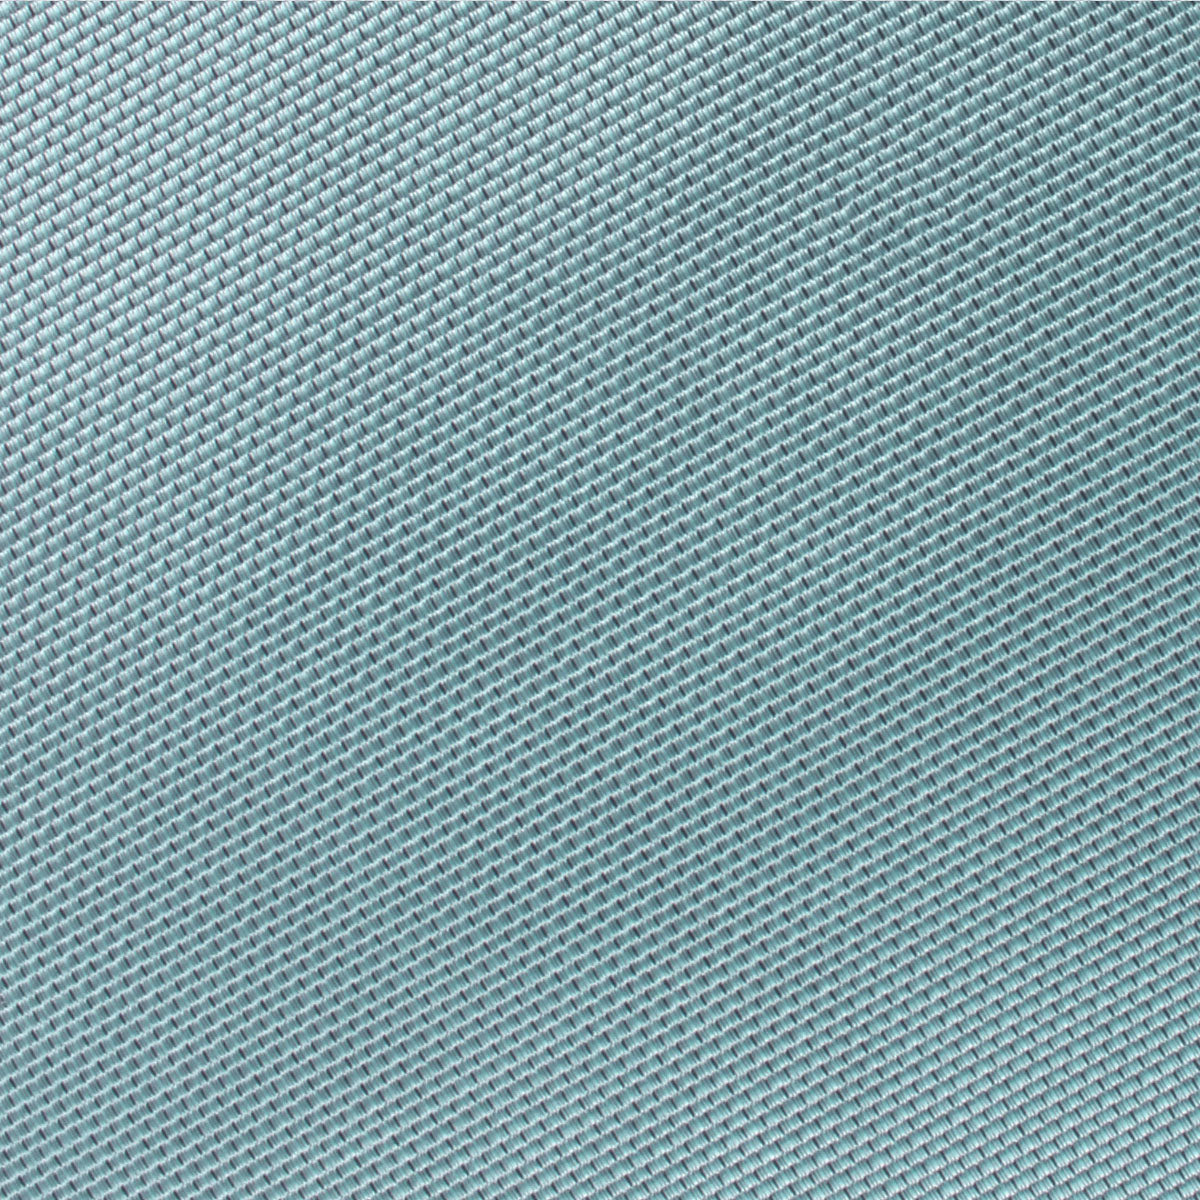 Turkish Teal Blue Weave Fabric Swatch